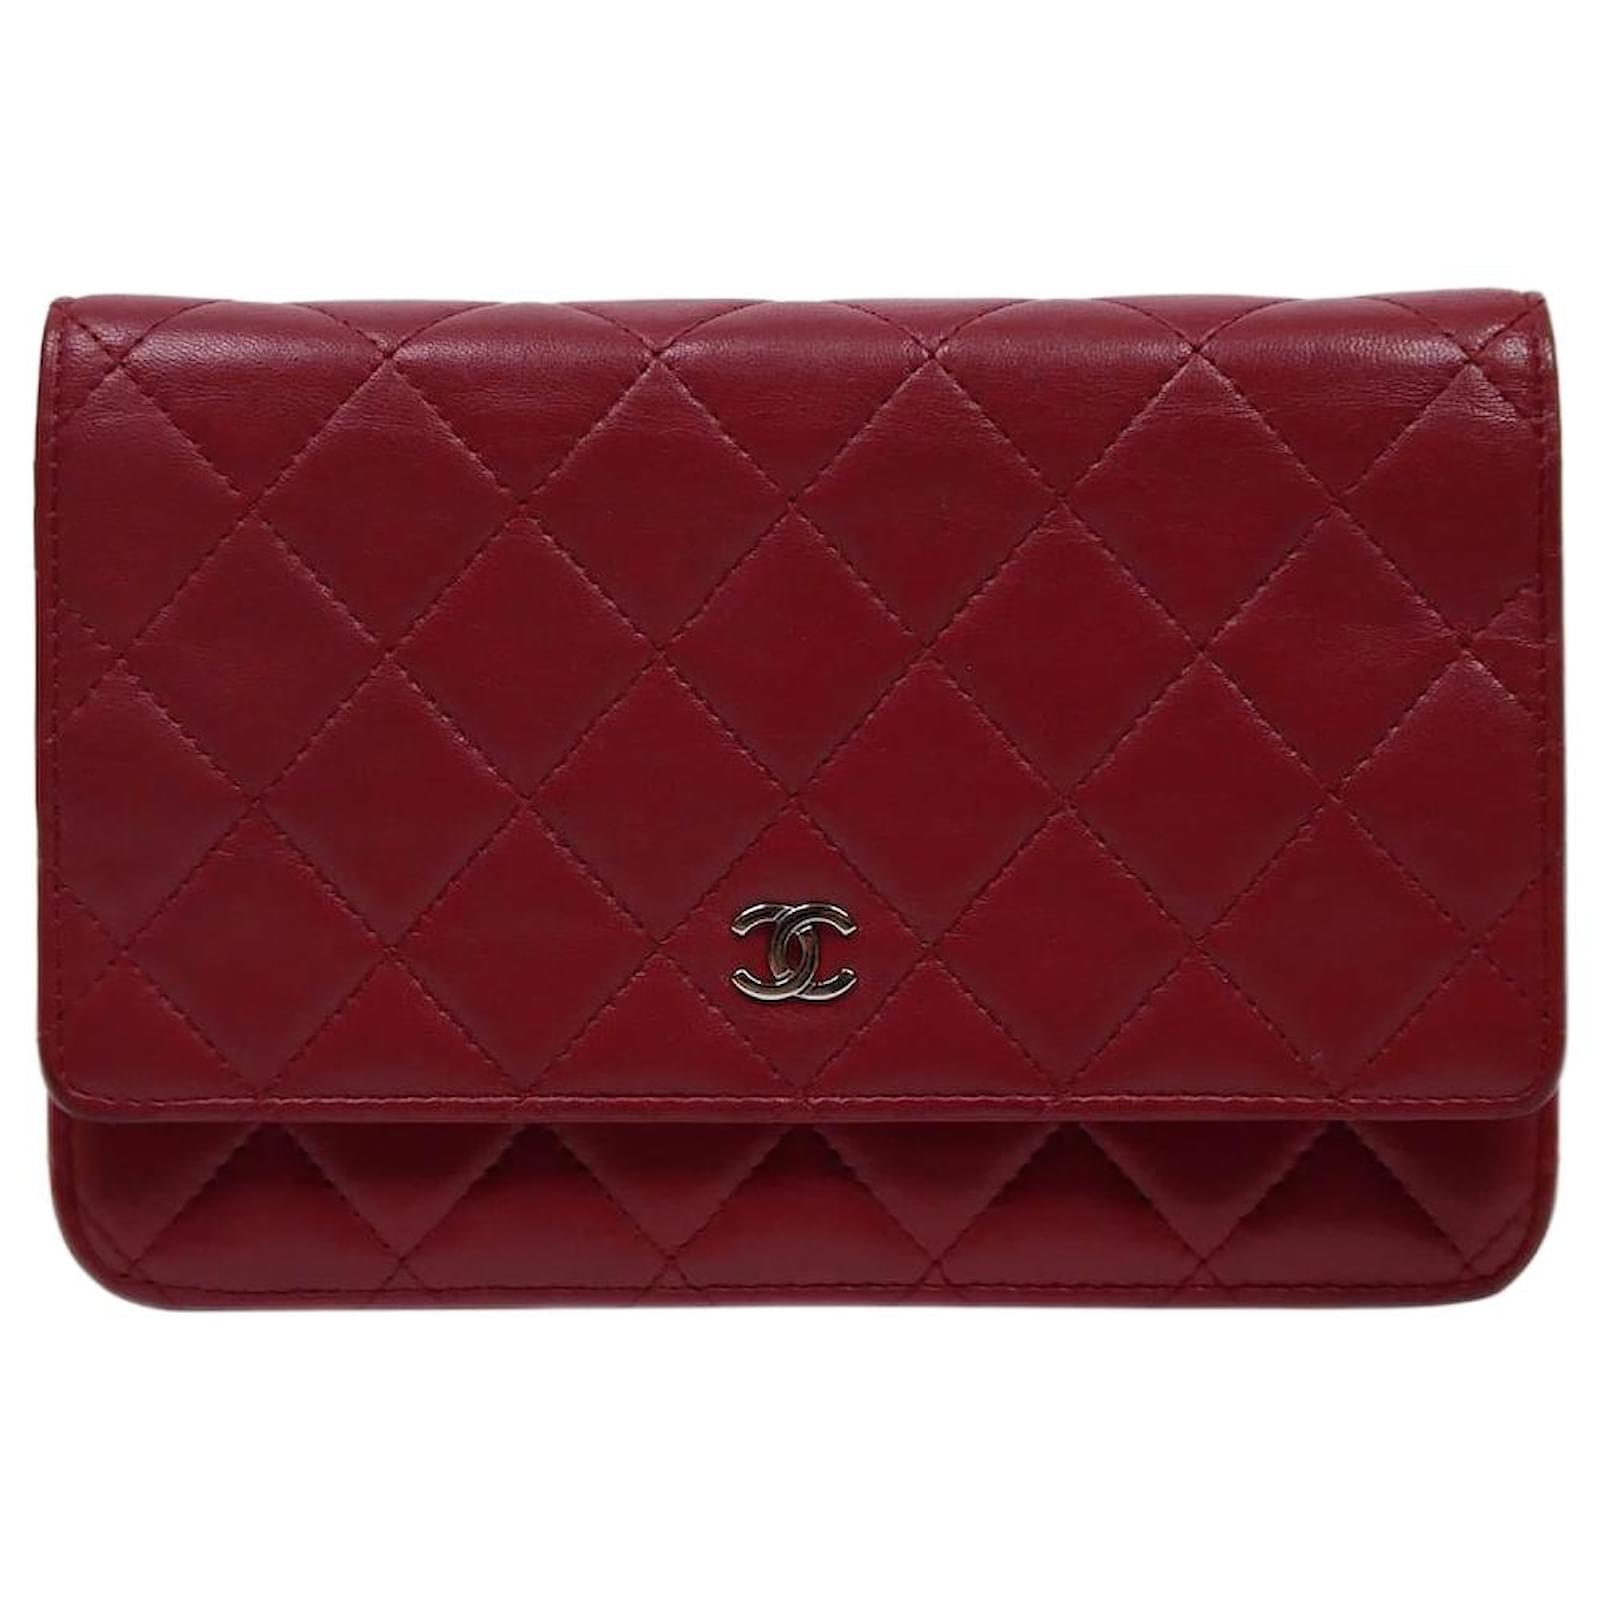 Chanel Red lambskin 2014 silver hardware Wallet On Chain Leather